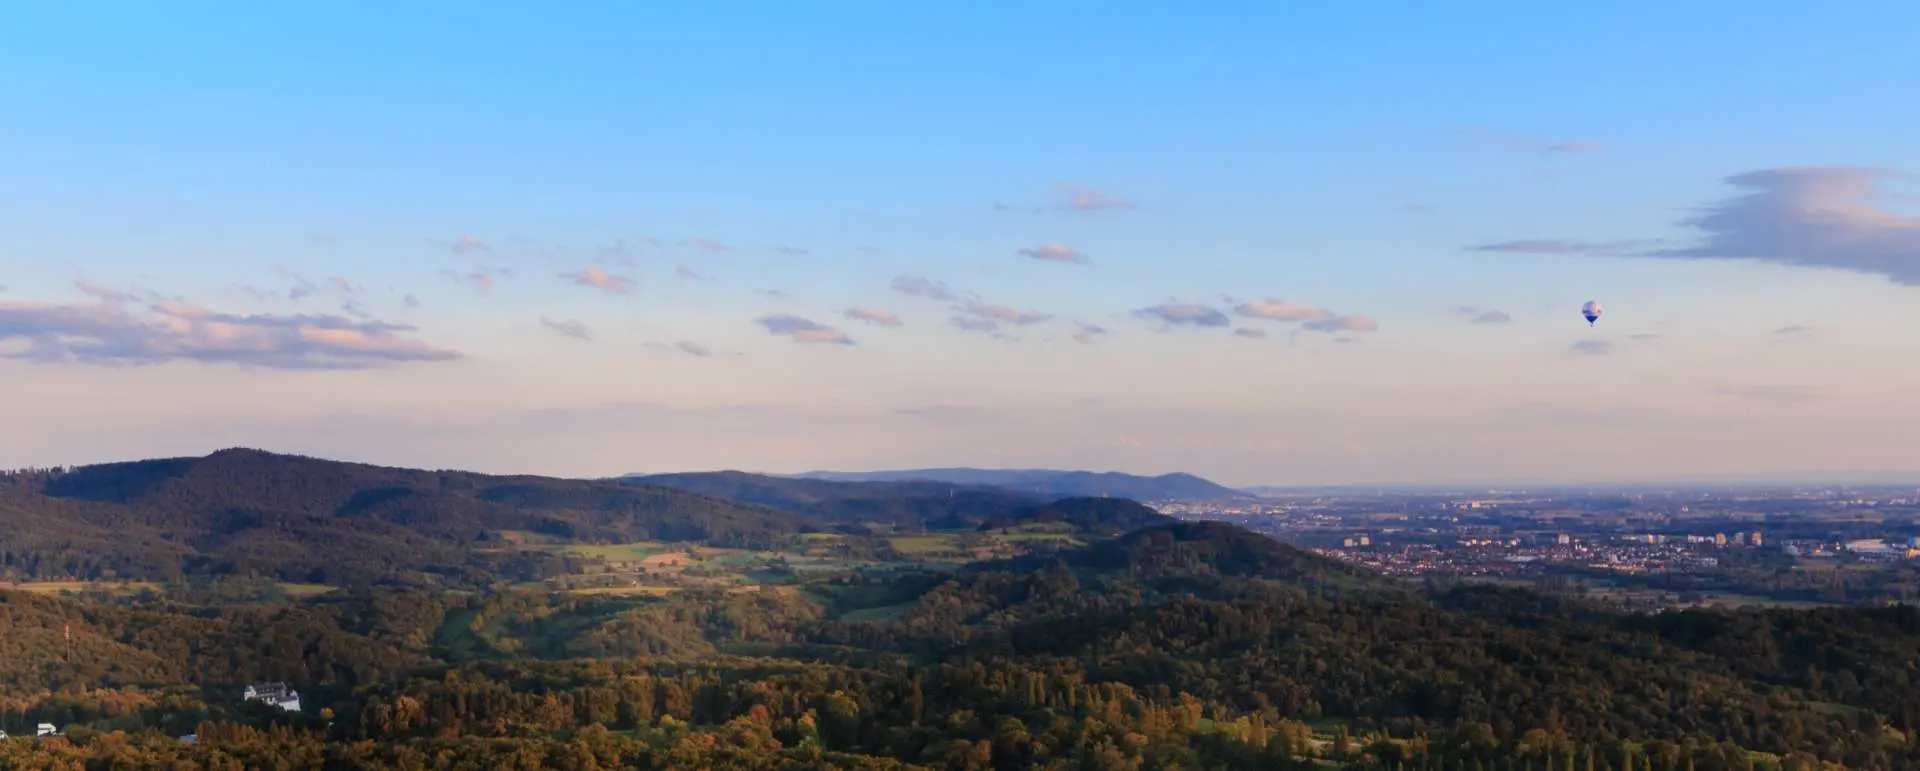 Constituency of Odenwald - affordable student hotels for educational trips